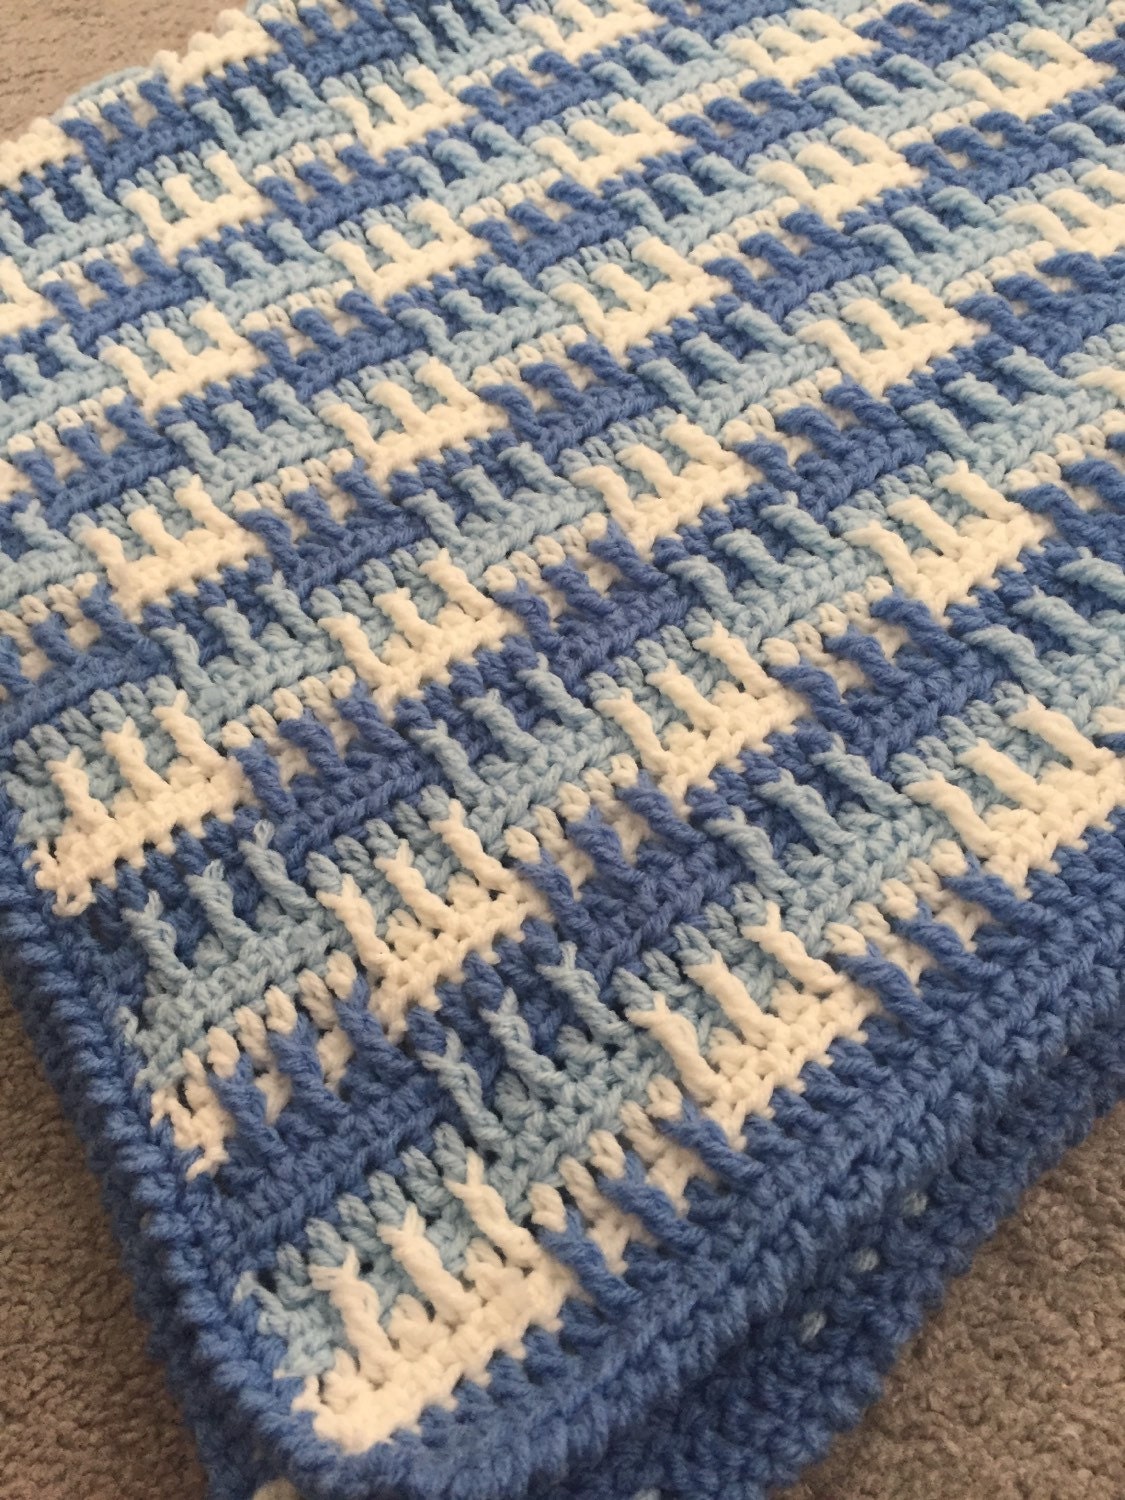 Blue and White Crochet Baby Afghan